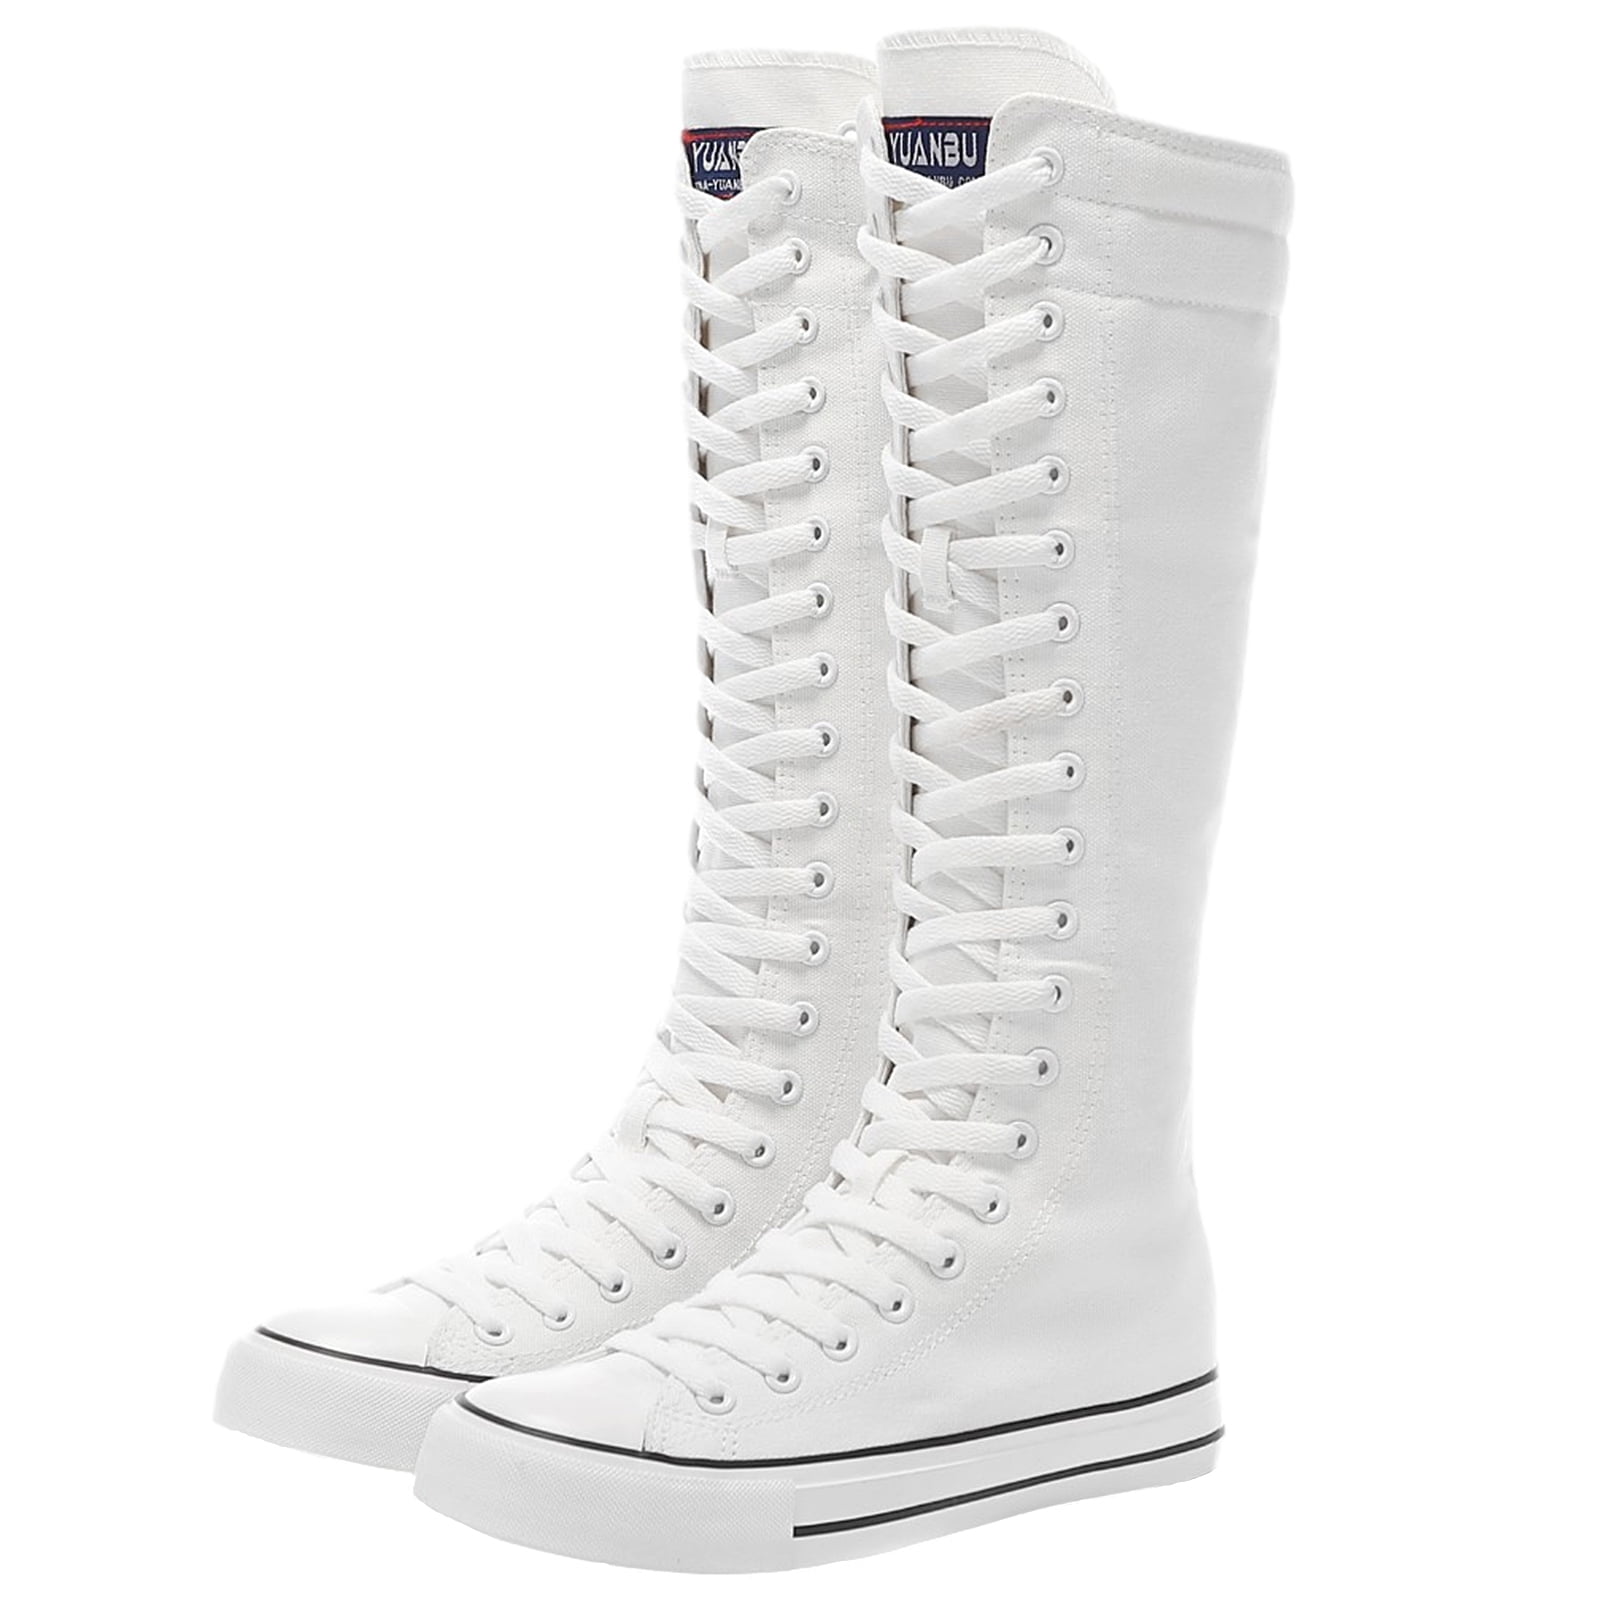 ANUFER Fashion Dance Boots Knee High Boots Girls Fancy School Shoes White 905 US9.5 - Walmart.com